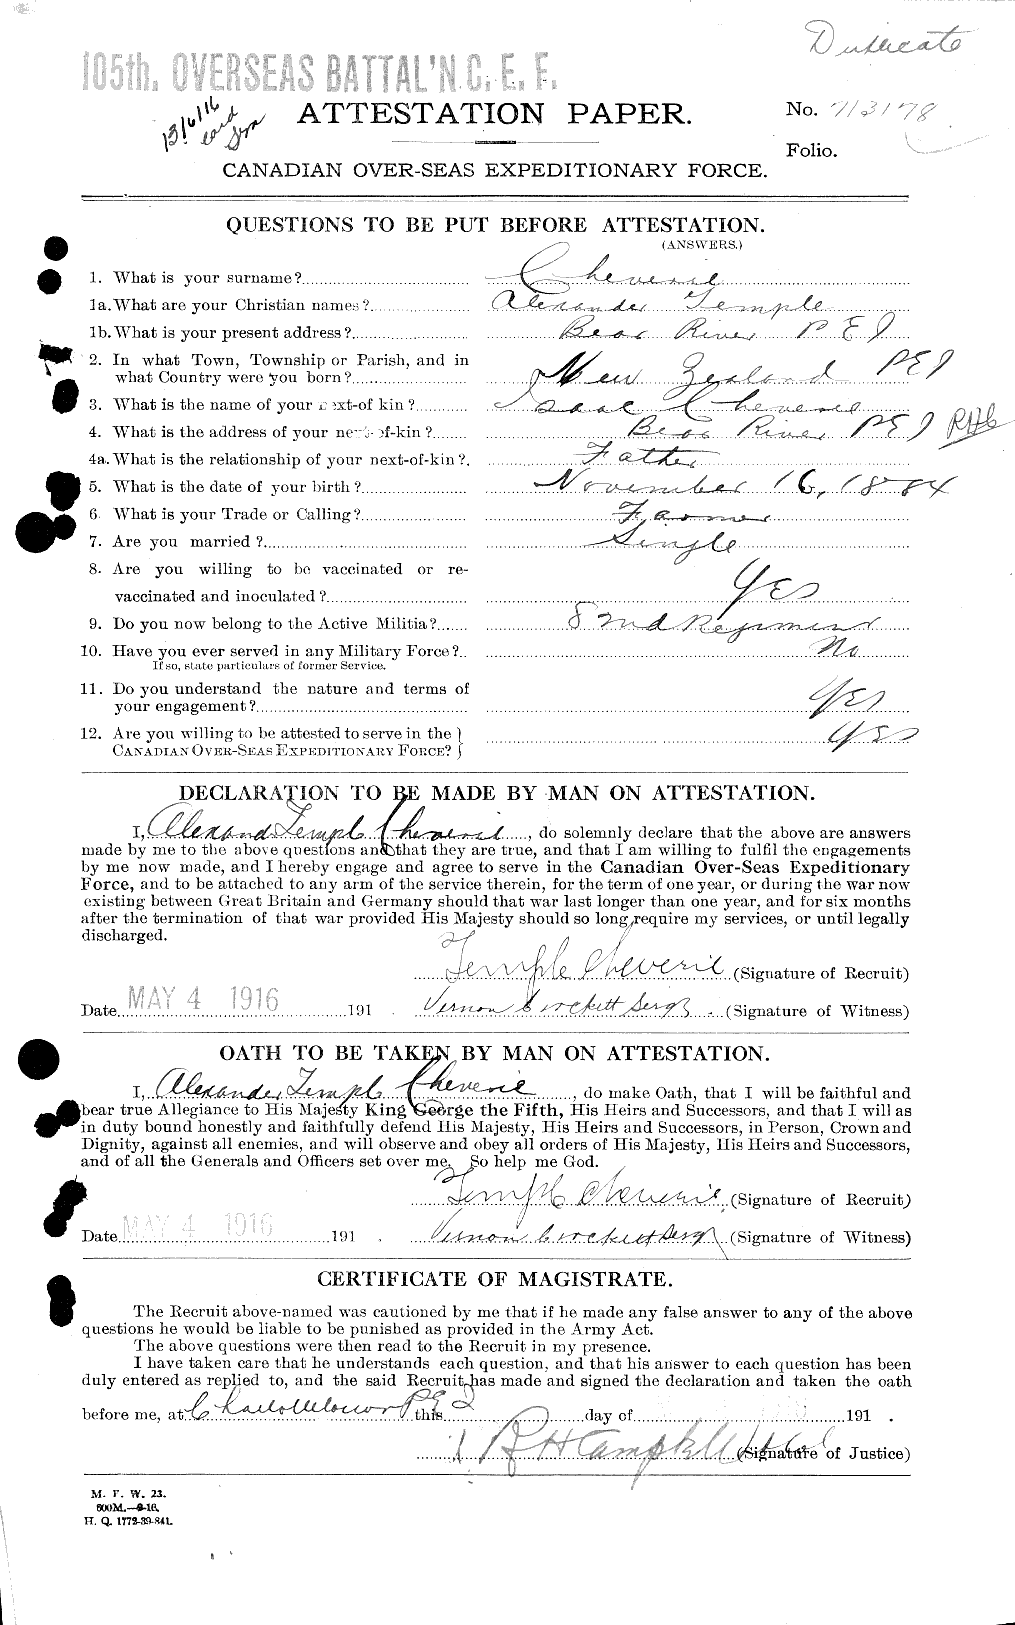 Personnel Records of the First World War - CEF 017813a